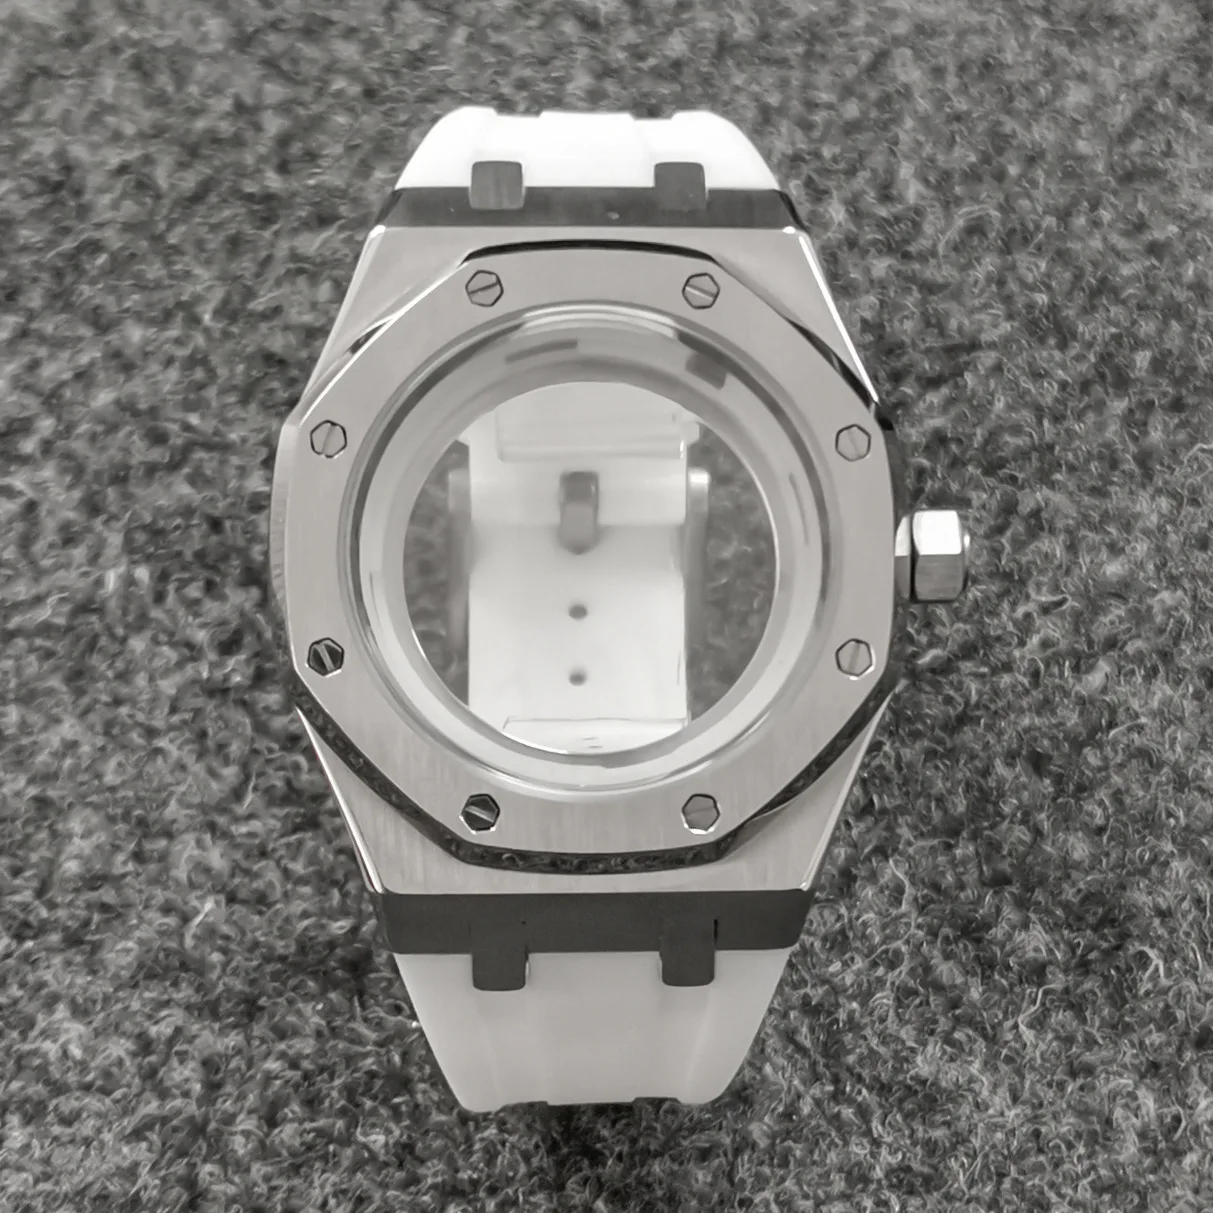 Enlarge Watch accessories 41 mm shell + rubber strap sapphire glass suitable for the NH35 NH36/4 r / 7 s movement